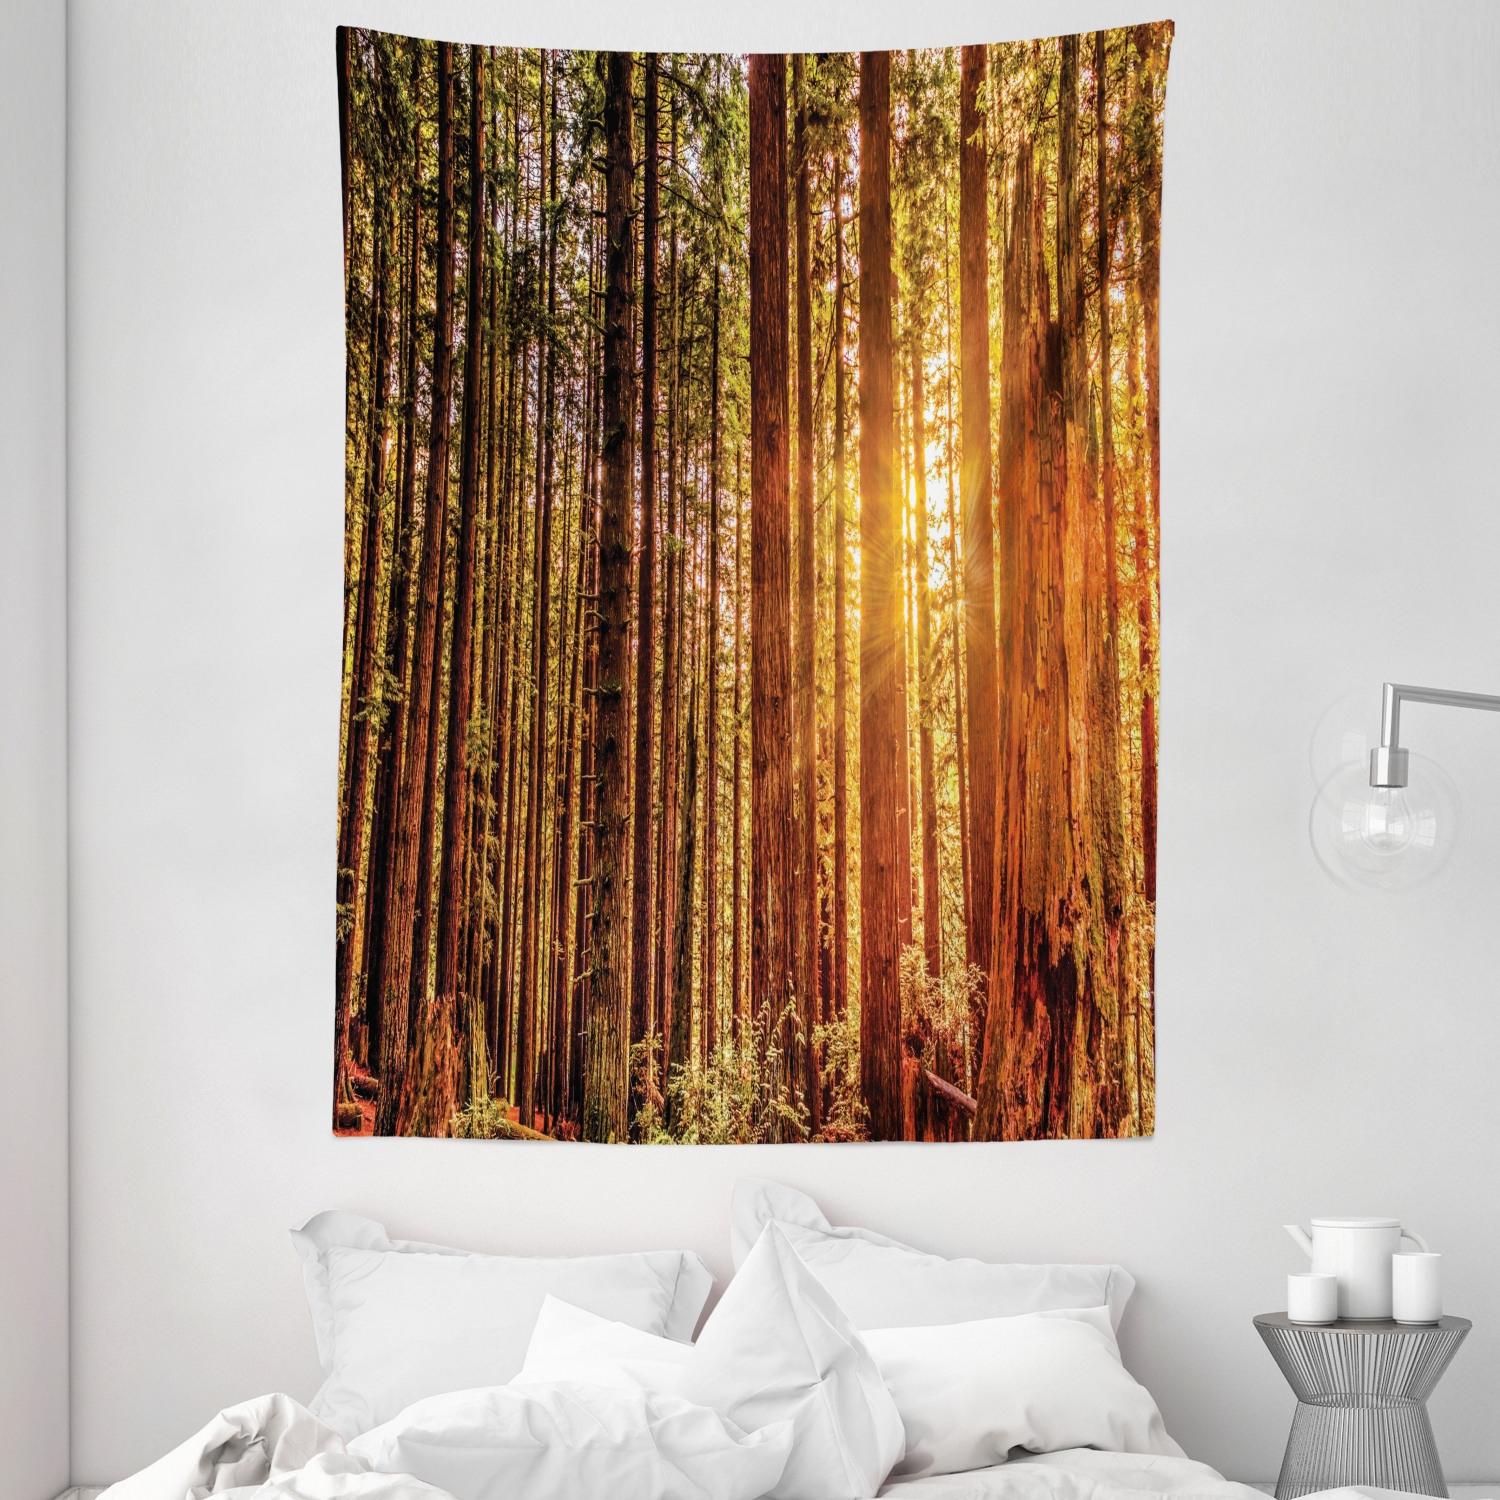 USA Tapestry Redwoods Forestry Print Wall Hanging Decor